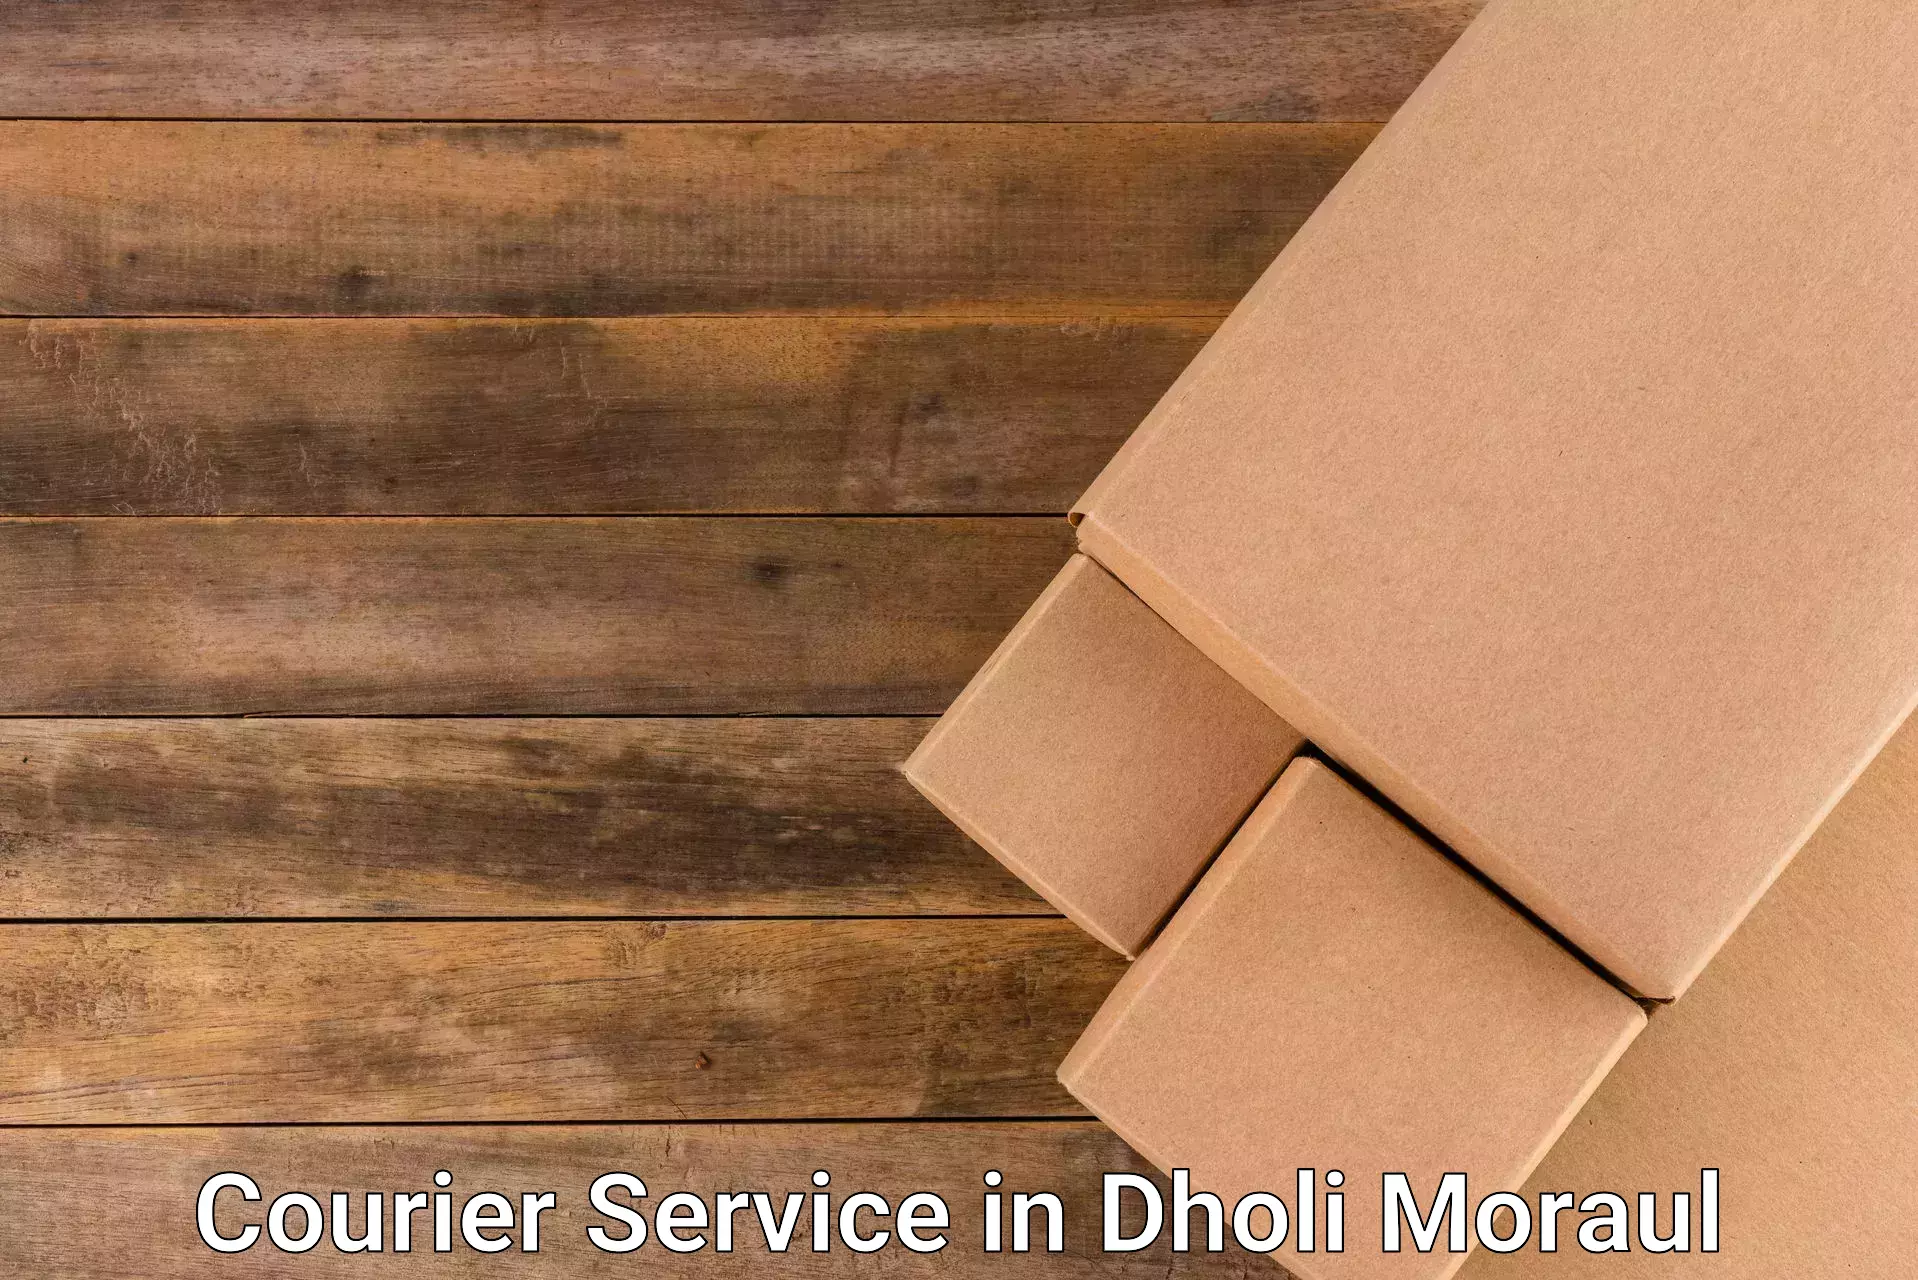 Flexible delivery schedules in Dholi Moraul